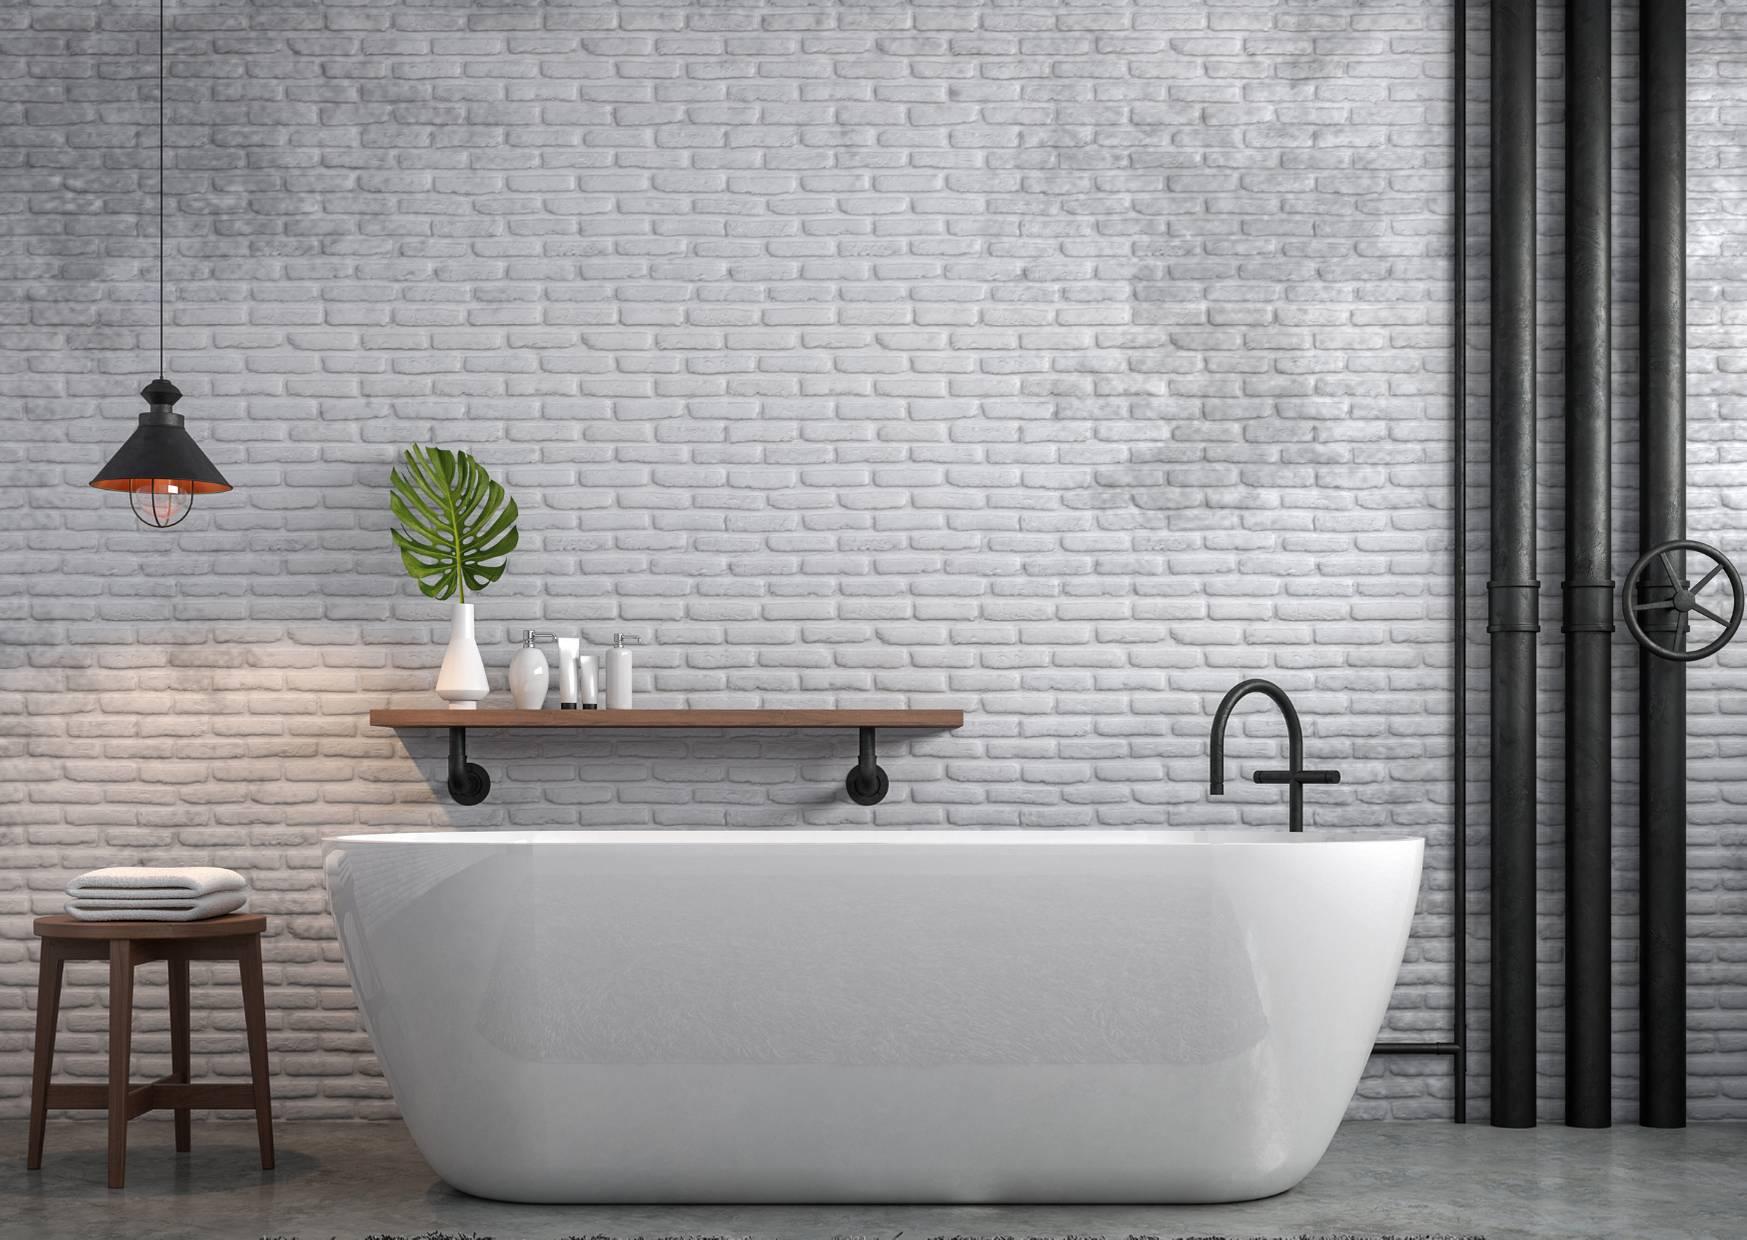 Bathroom Accessories List: Upgrade Your Space